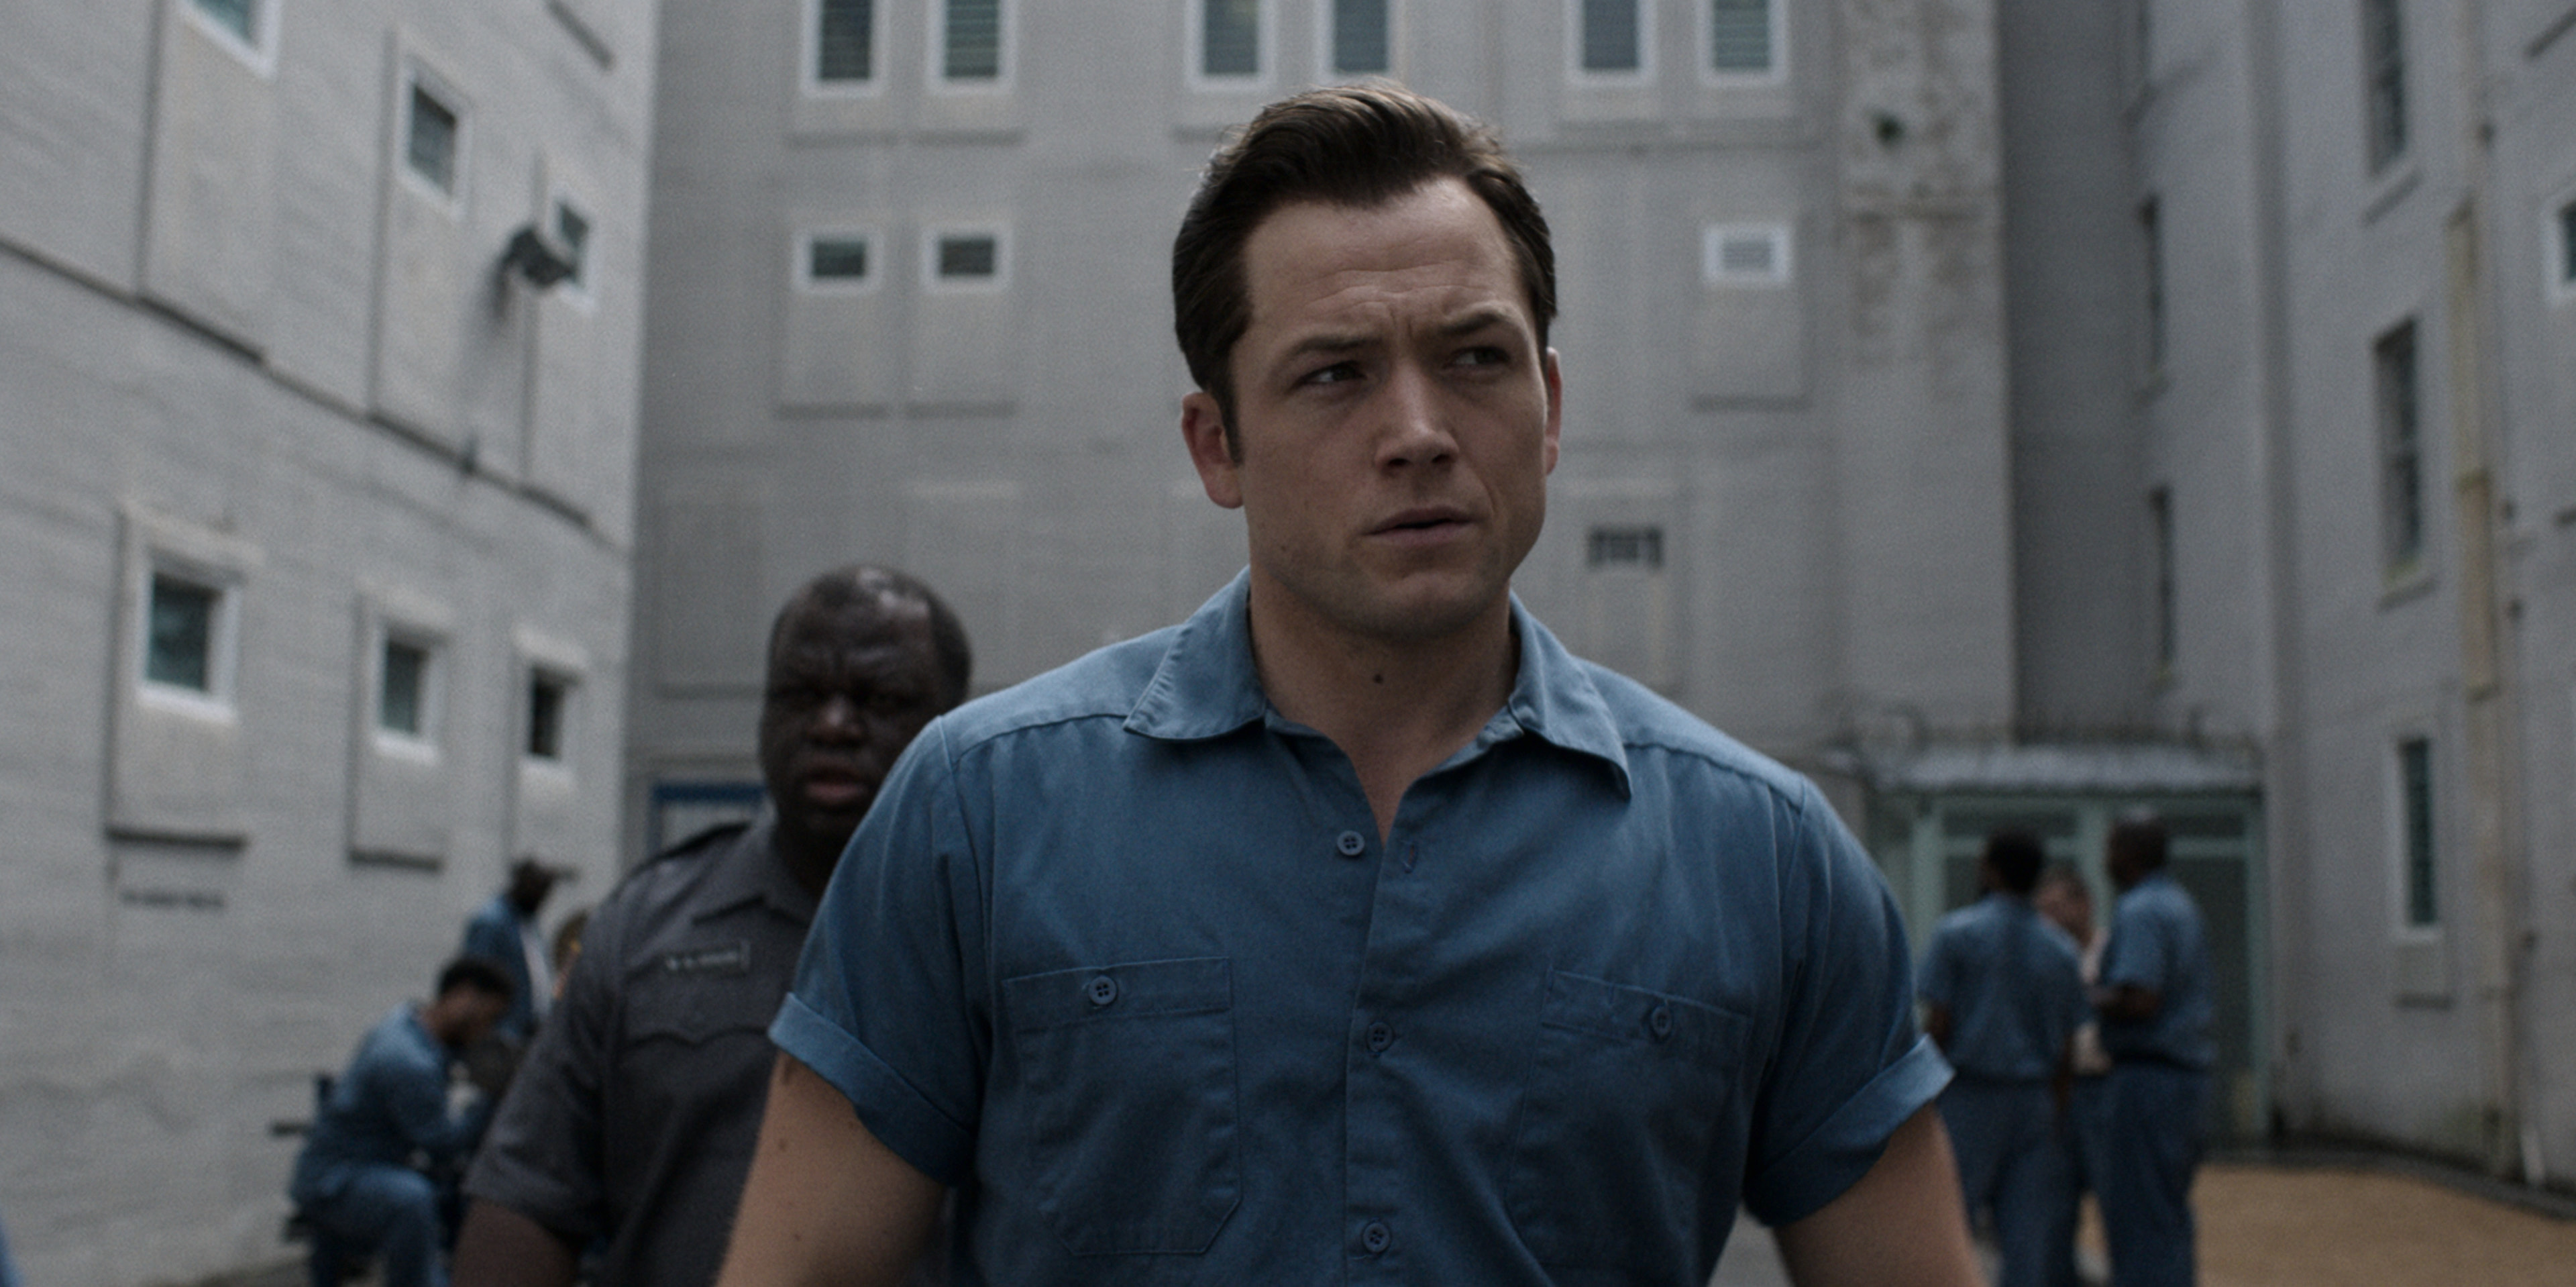 Did Taron Egerton Gain Weight and Build Muscles for Black Bird?